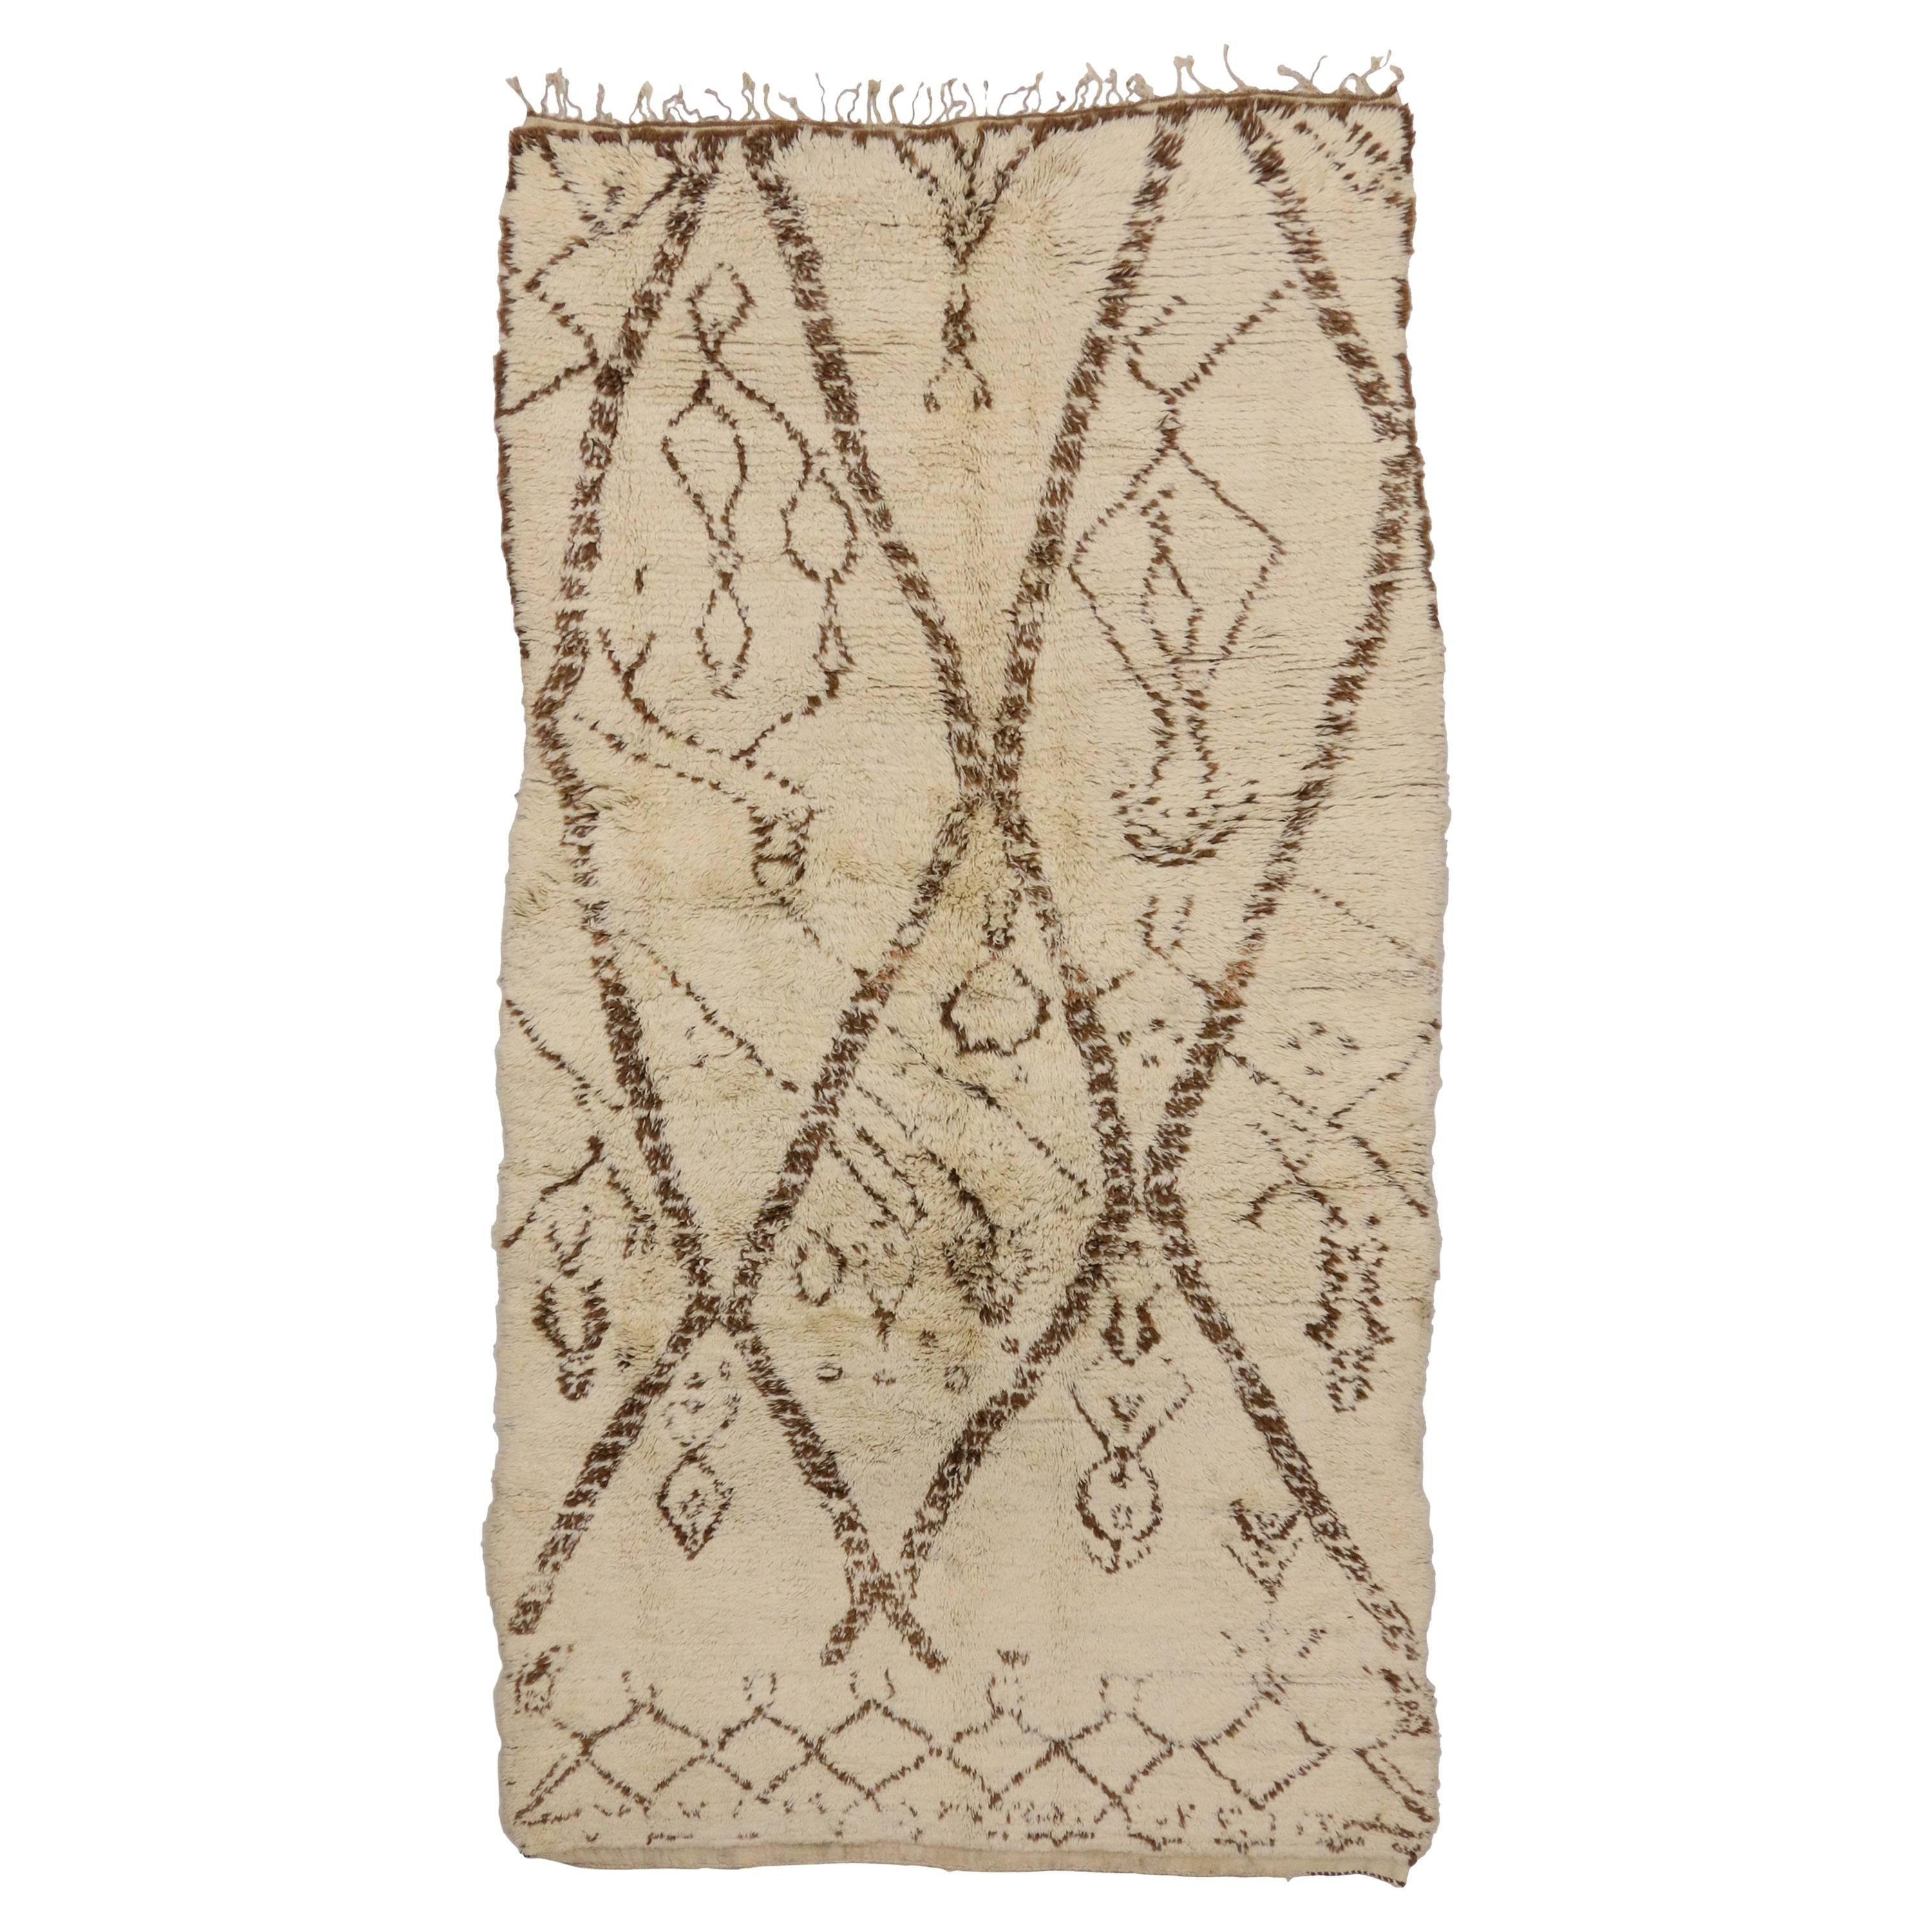 Vintage Moroccan Rug with Tribal Style, Neutral Color Berber Moroccan Rug